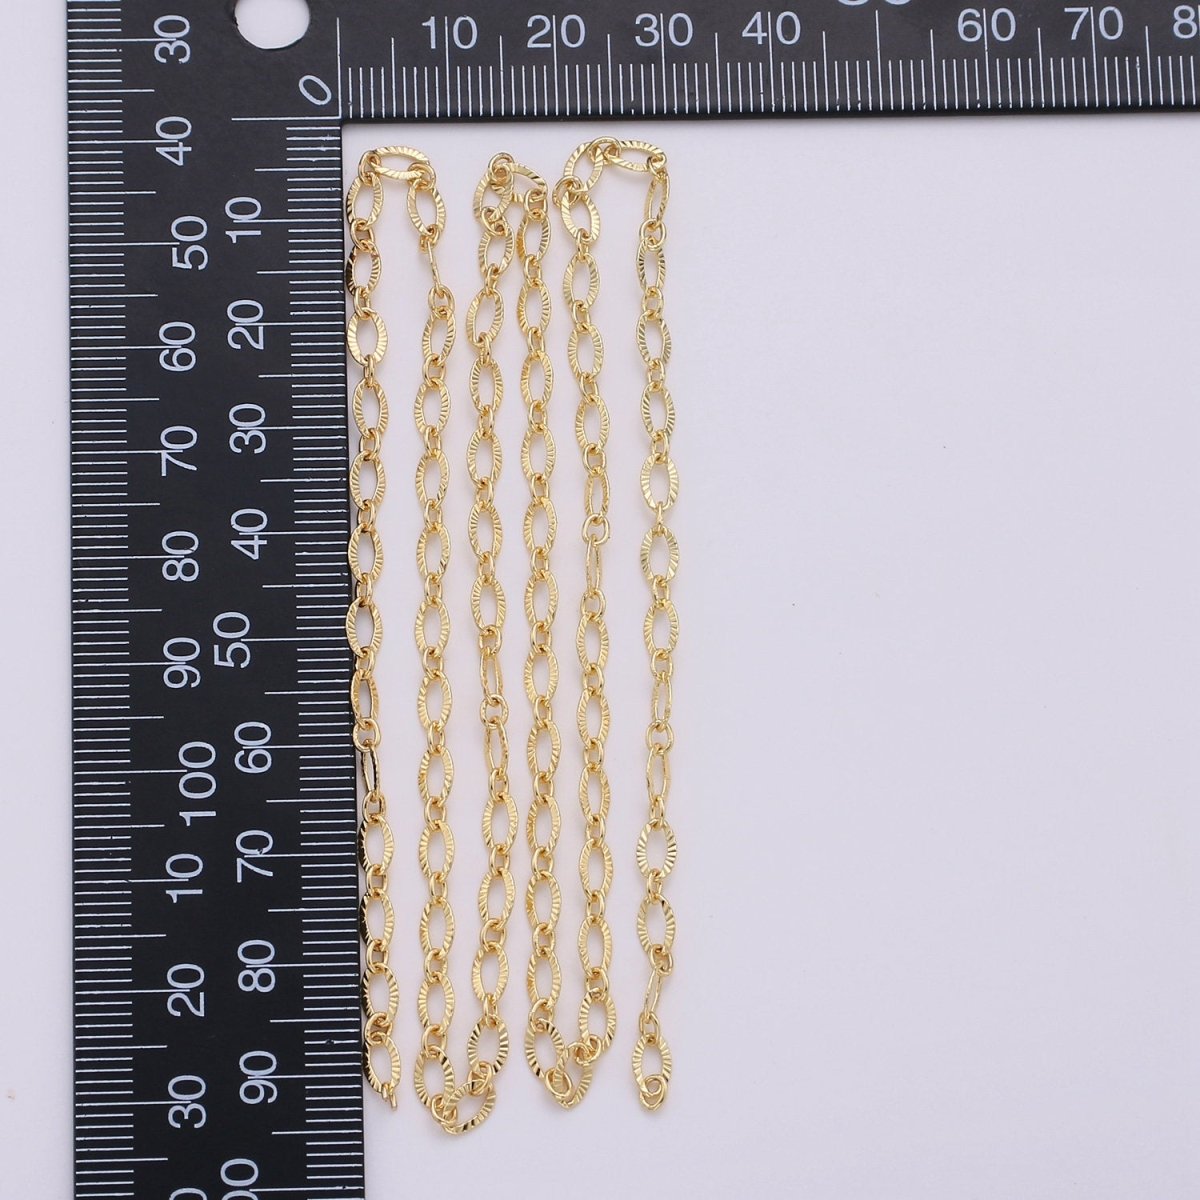 24K Gold Filled Chain - Textured CABLE Chain - 6x3.5mm - Unfinished Chain by Yard For Jewelry Making | ROLL-135 Clearance Pricing - DLUXCA